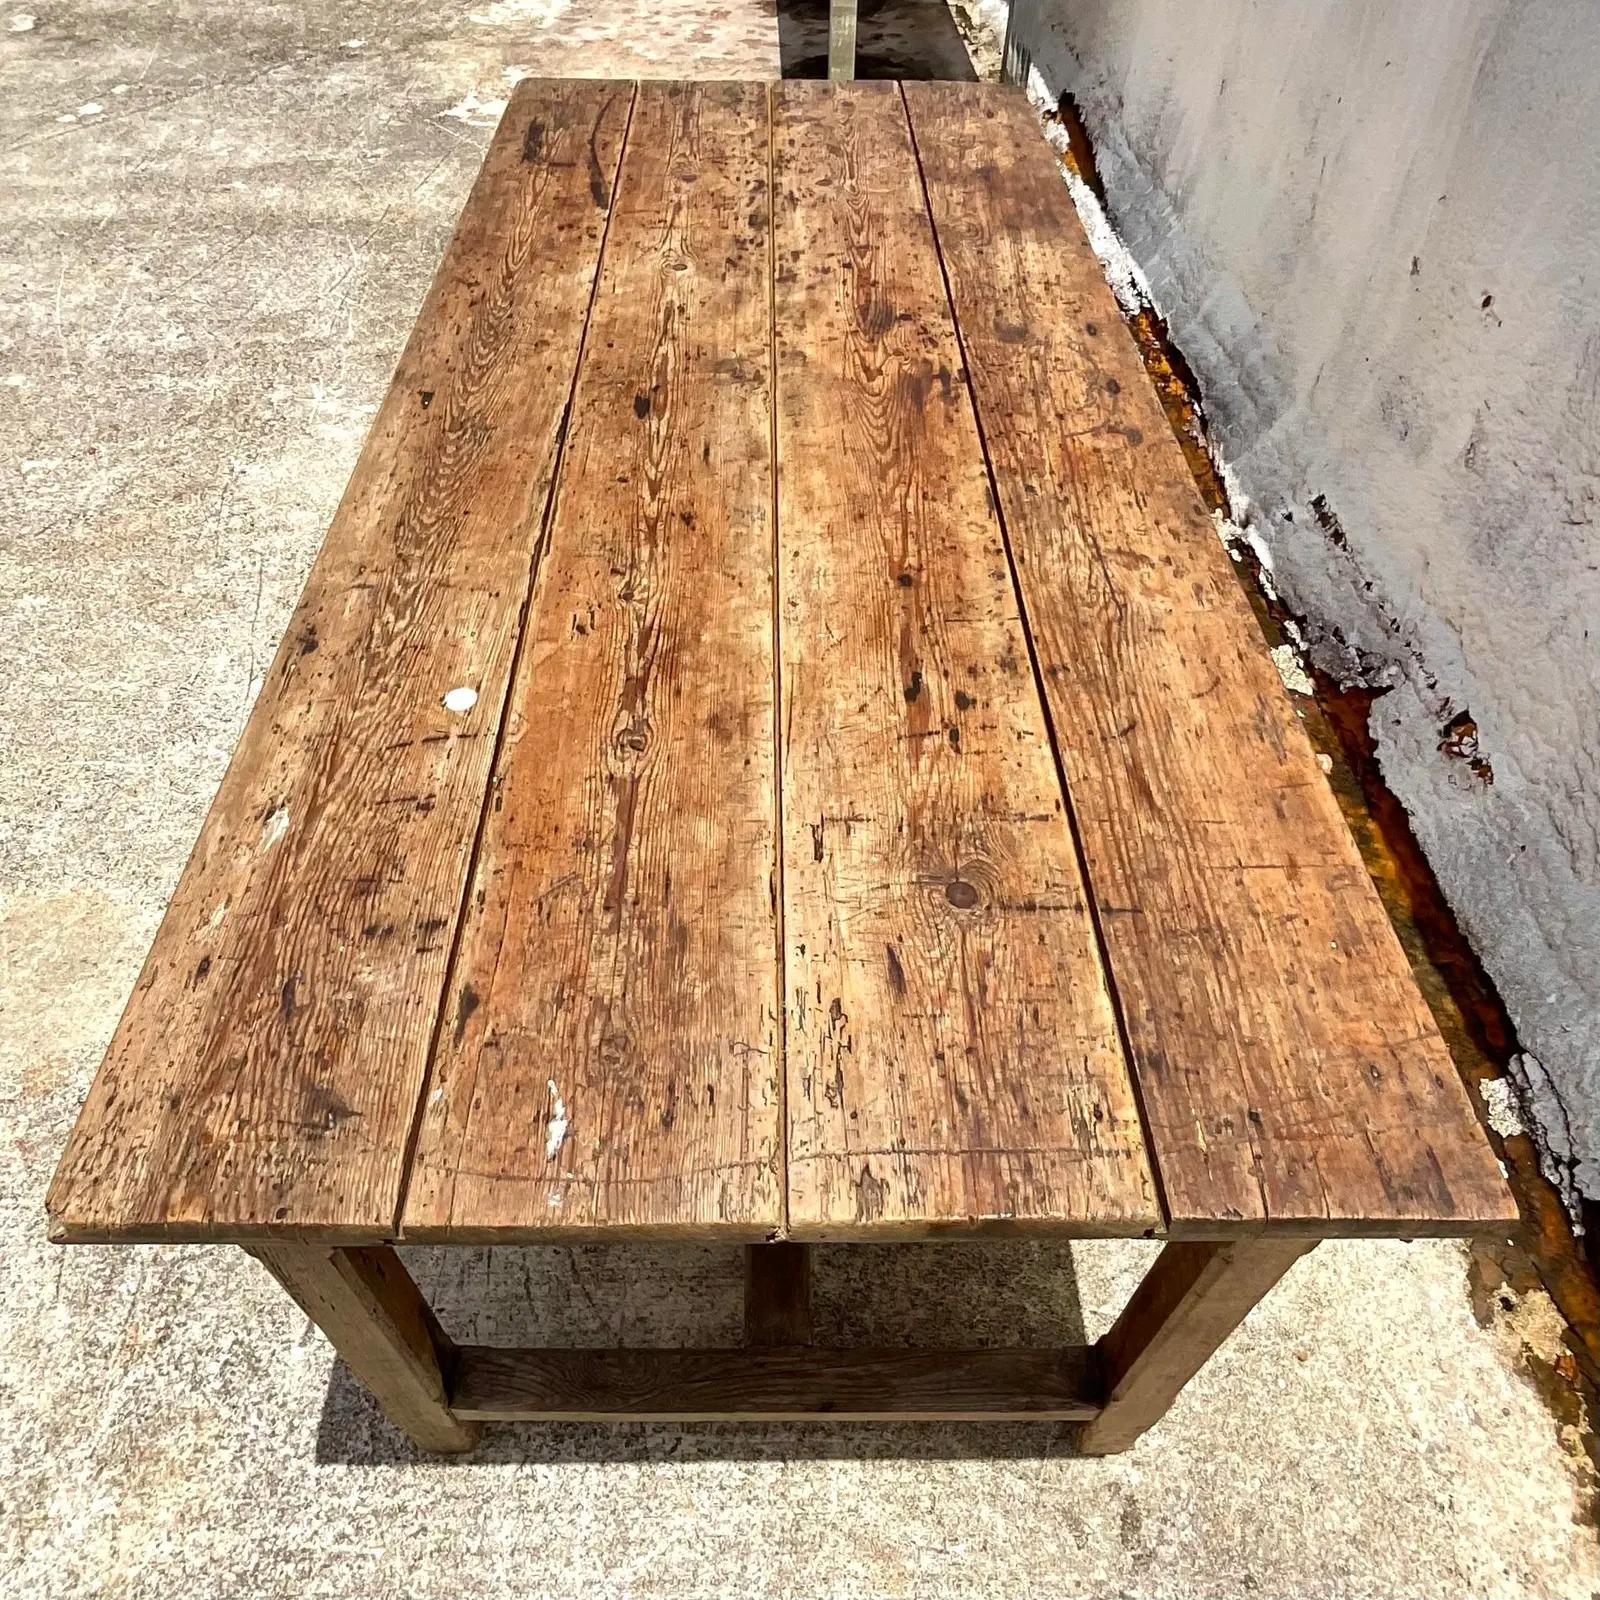 Vintage Boho dining table. A primitive piece with all the distressed charm of vintage farm table. Drawers underneath for additional storage. Acquired from a Palm Beach estate.